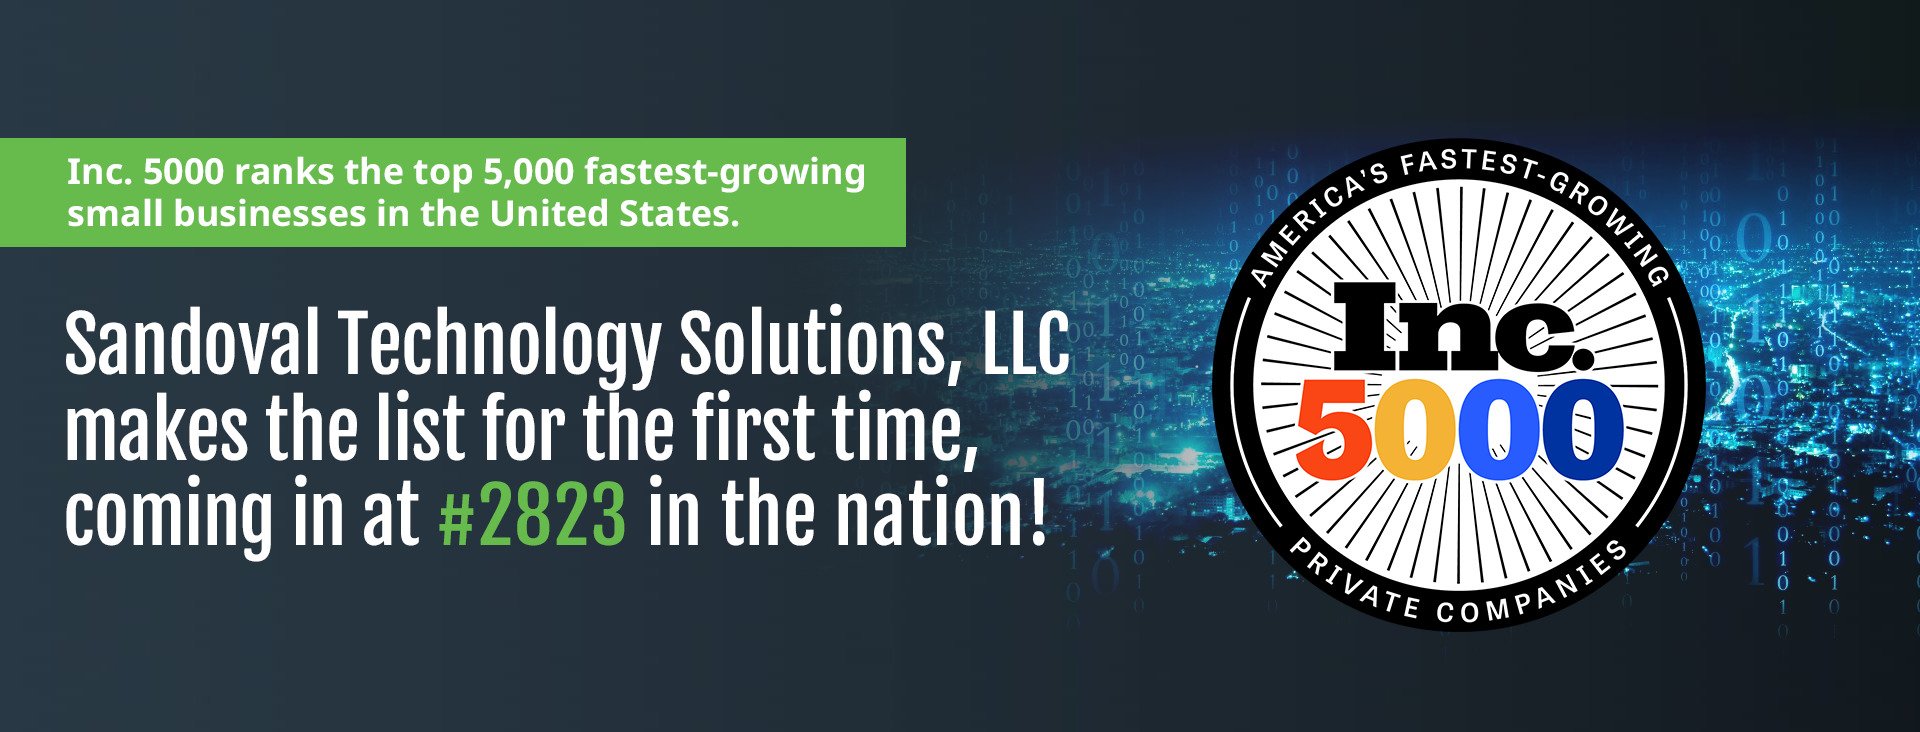 Sandoval Technology Solutions LLC makes the list for the first time, coming in at #2823 in the nation